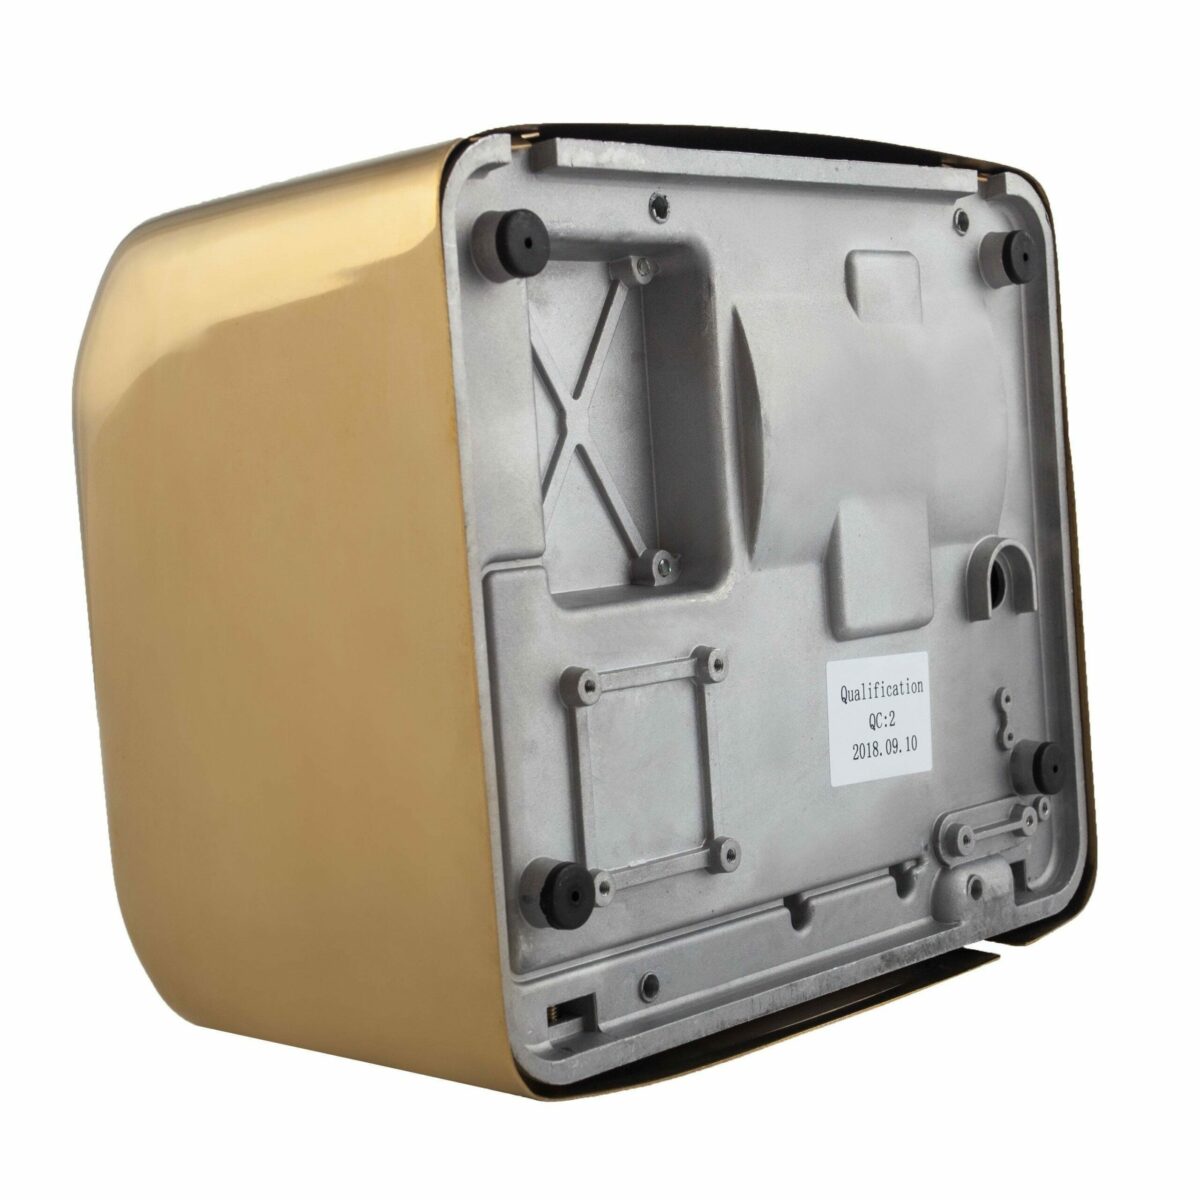 Storm Stainless Steel Commercial Hand Dryer - Gold - ABIS